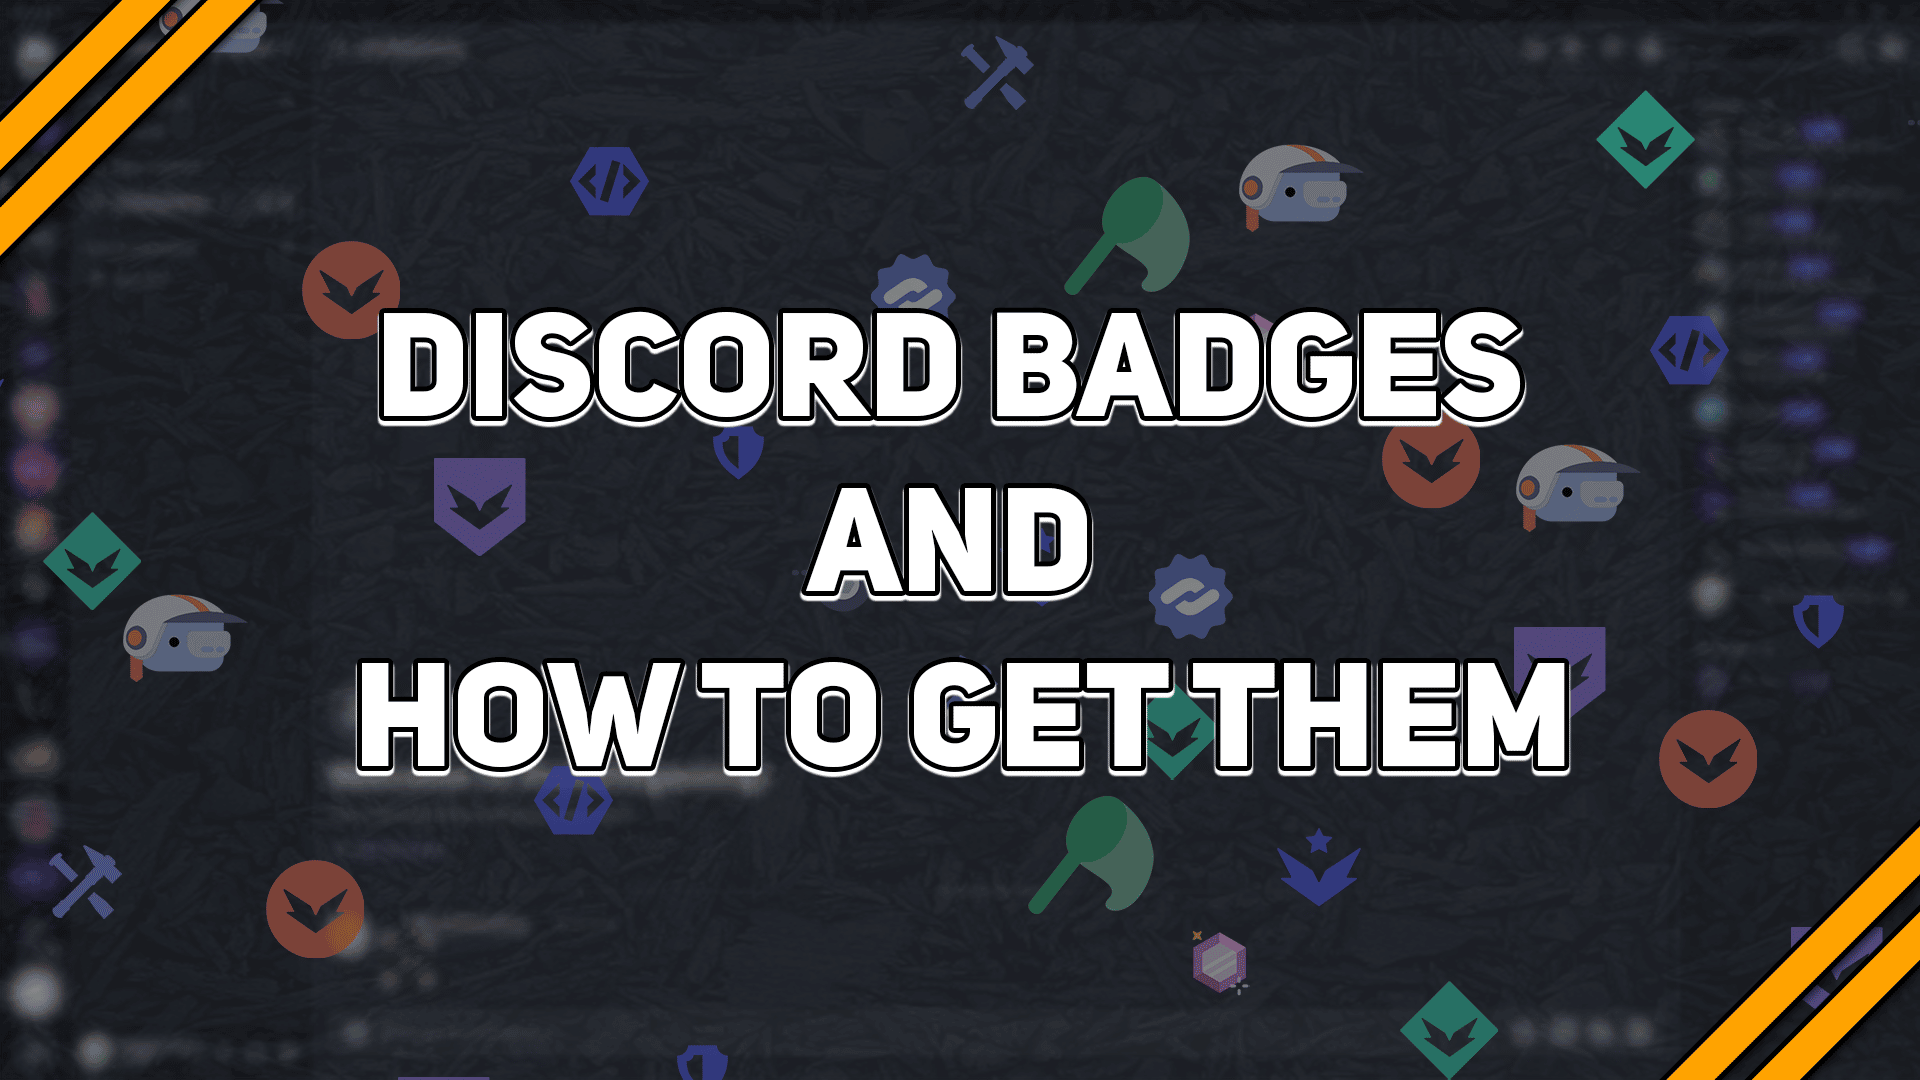 Discord Badges and how to get them